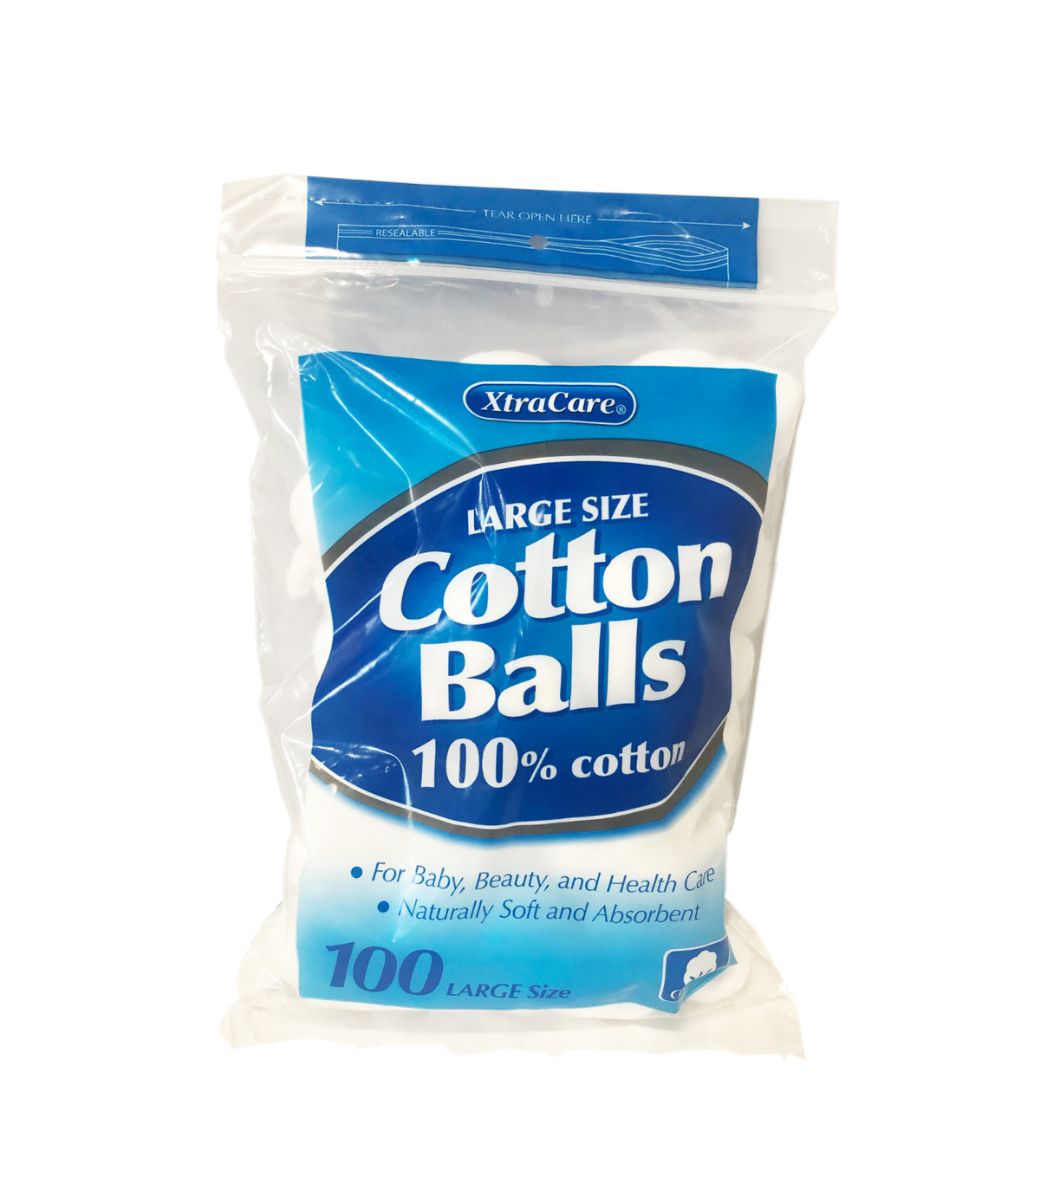 XTRACARE - Cotton Balls Large Size 100% Cotton - DUKANEE BEAUTY SUPPLY